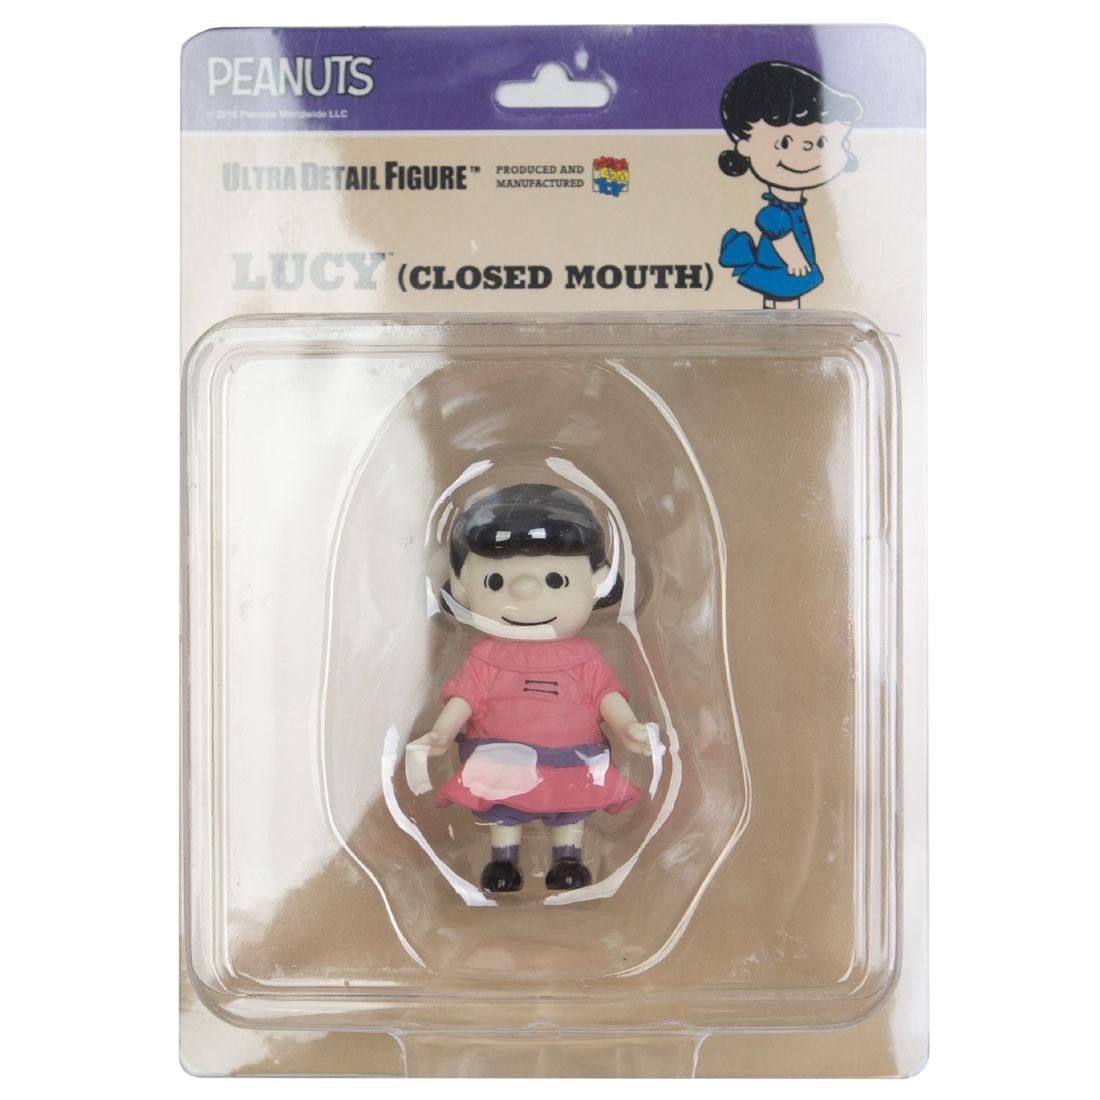 Medicom UDF Peanuts Vintage Ver. Closed Mouth Lucy Ultra Detail Figure (pink)